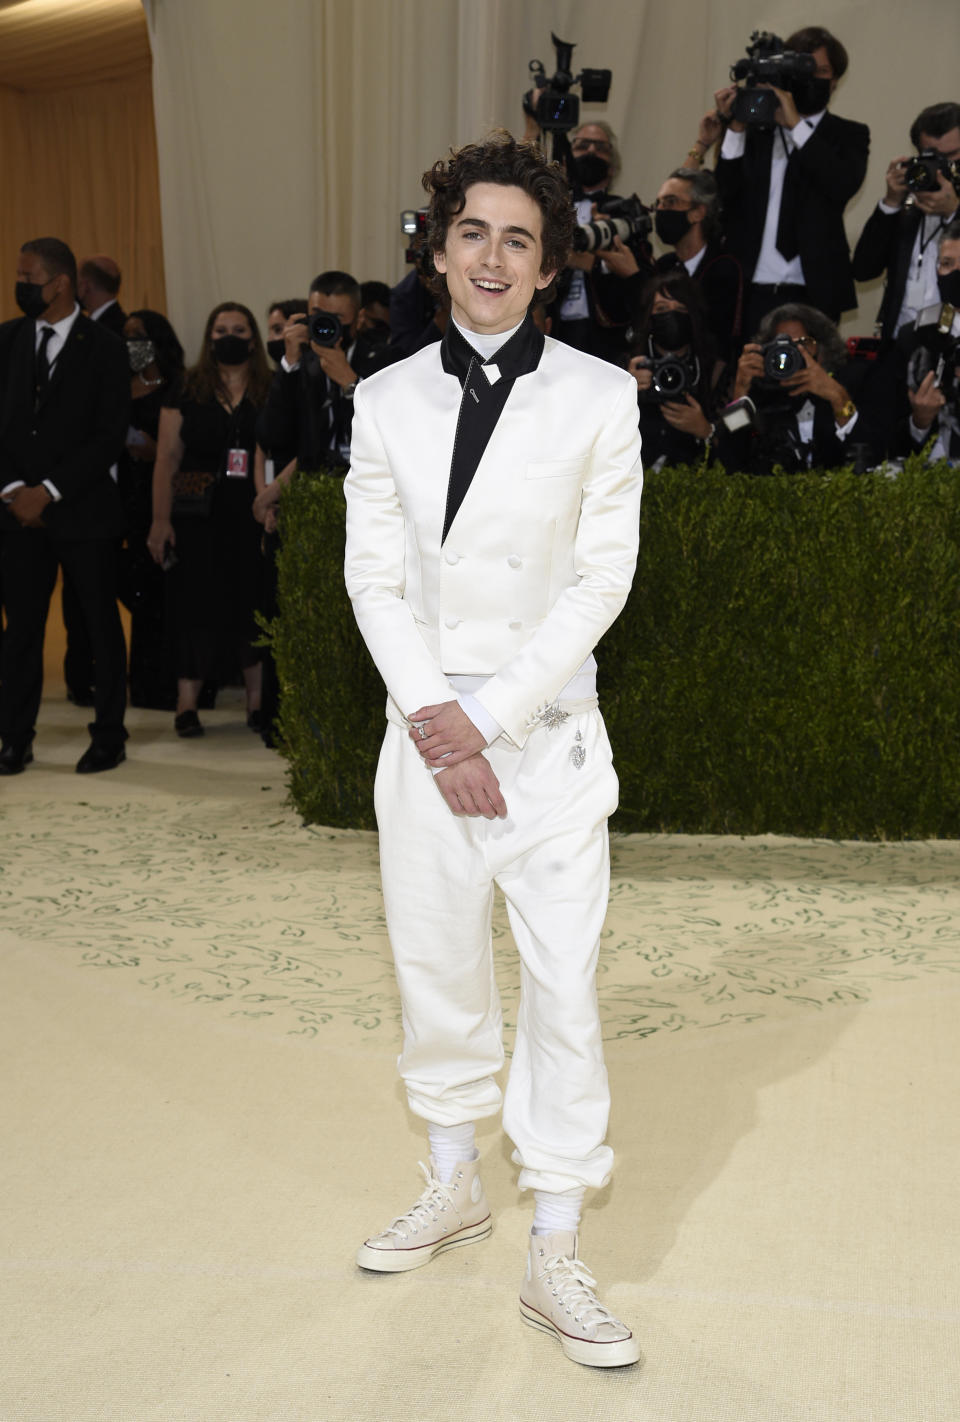 Timothee Chalamet attends The Metropolitan Museum of Art's Costume Institute benefit gala celebrating the opening of the "In America: A Lexicon of Fashion" exhibition on Monday, Sept. 13, 2021, in New York. (Photo by Evan Agostini/Invision/AP)